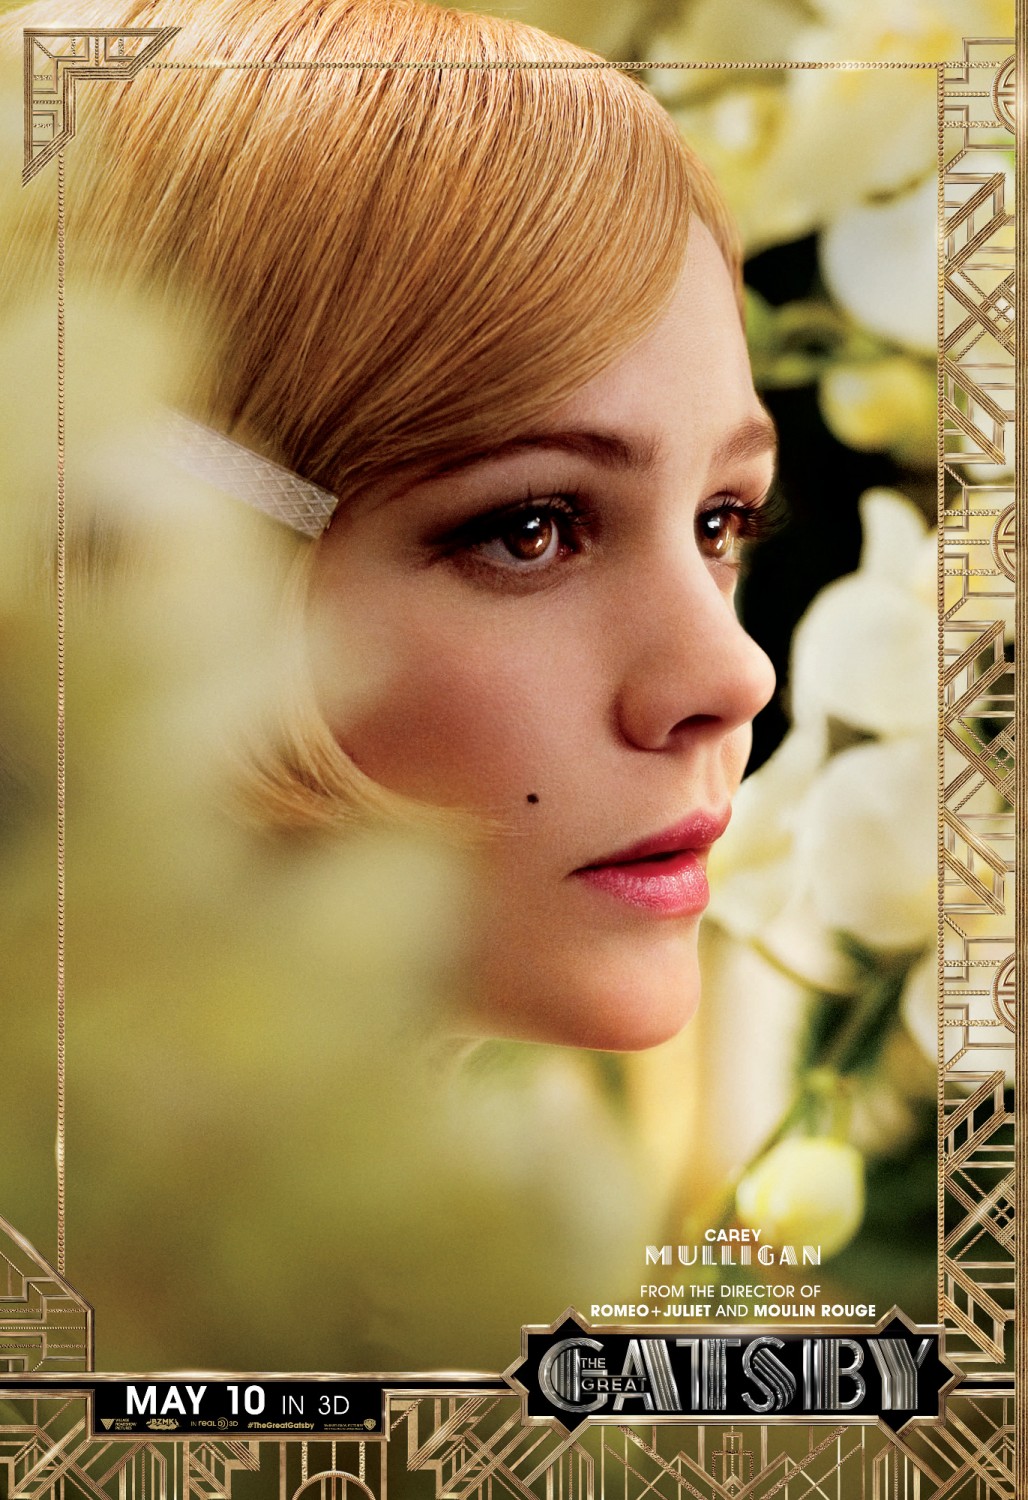 2013 The Great Gatsby